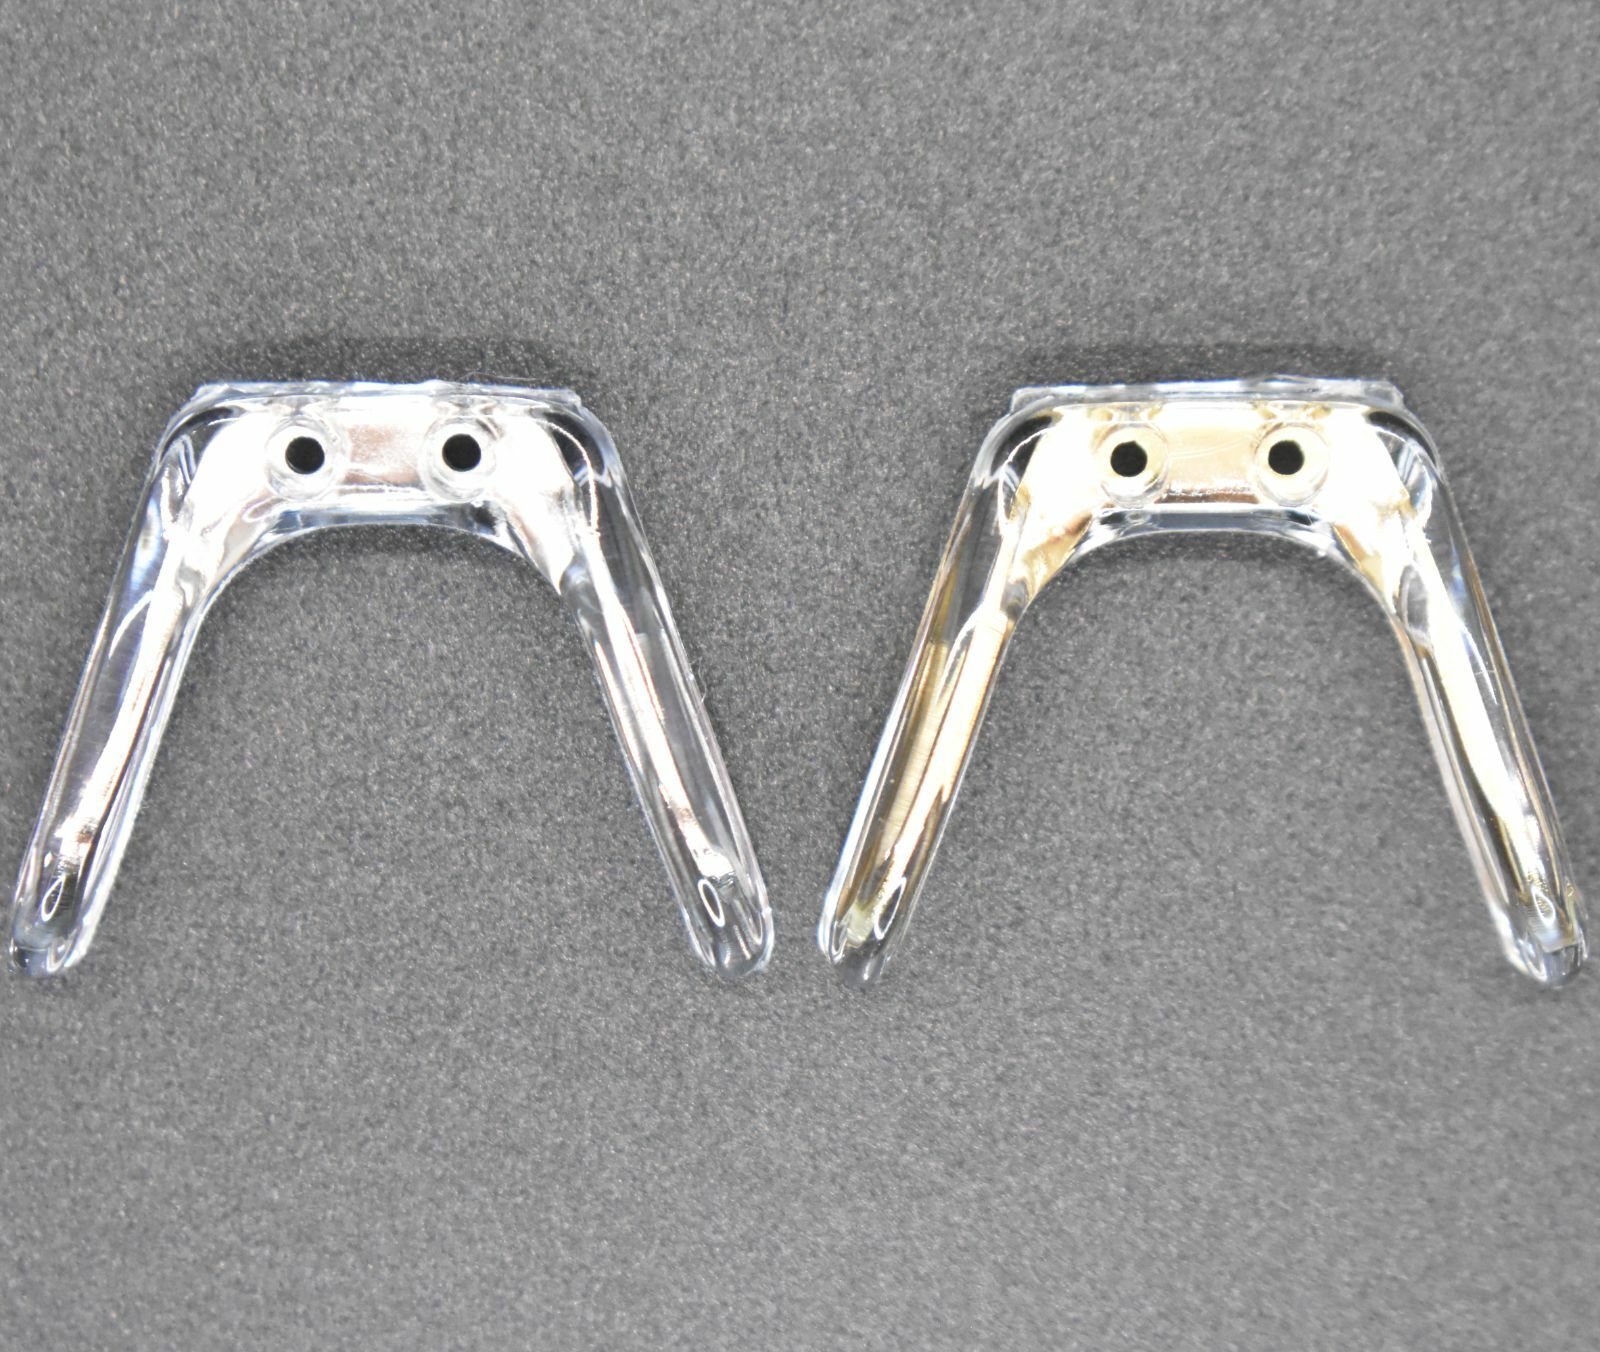 Silicone Bridge Nose Pads with Gold/Silver Metal Core for Sungla